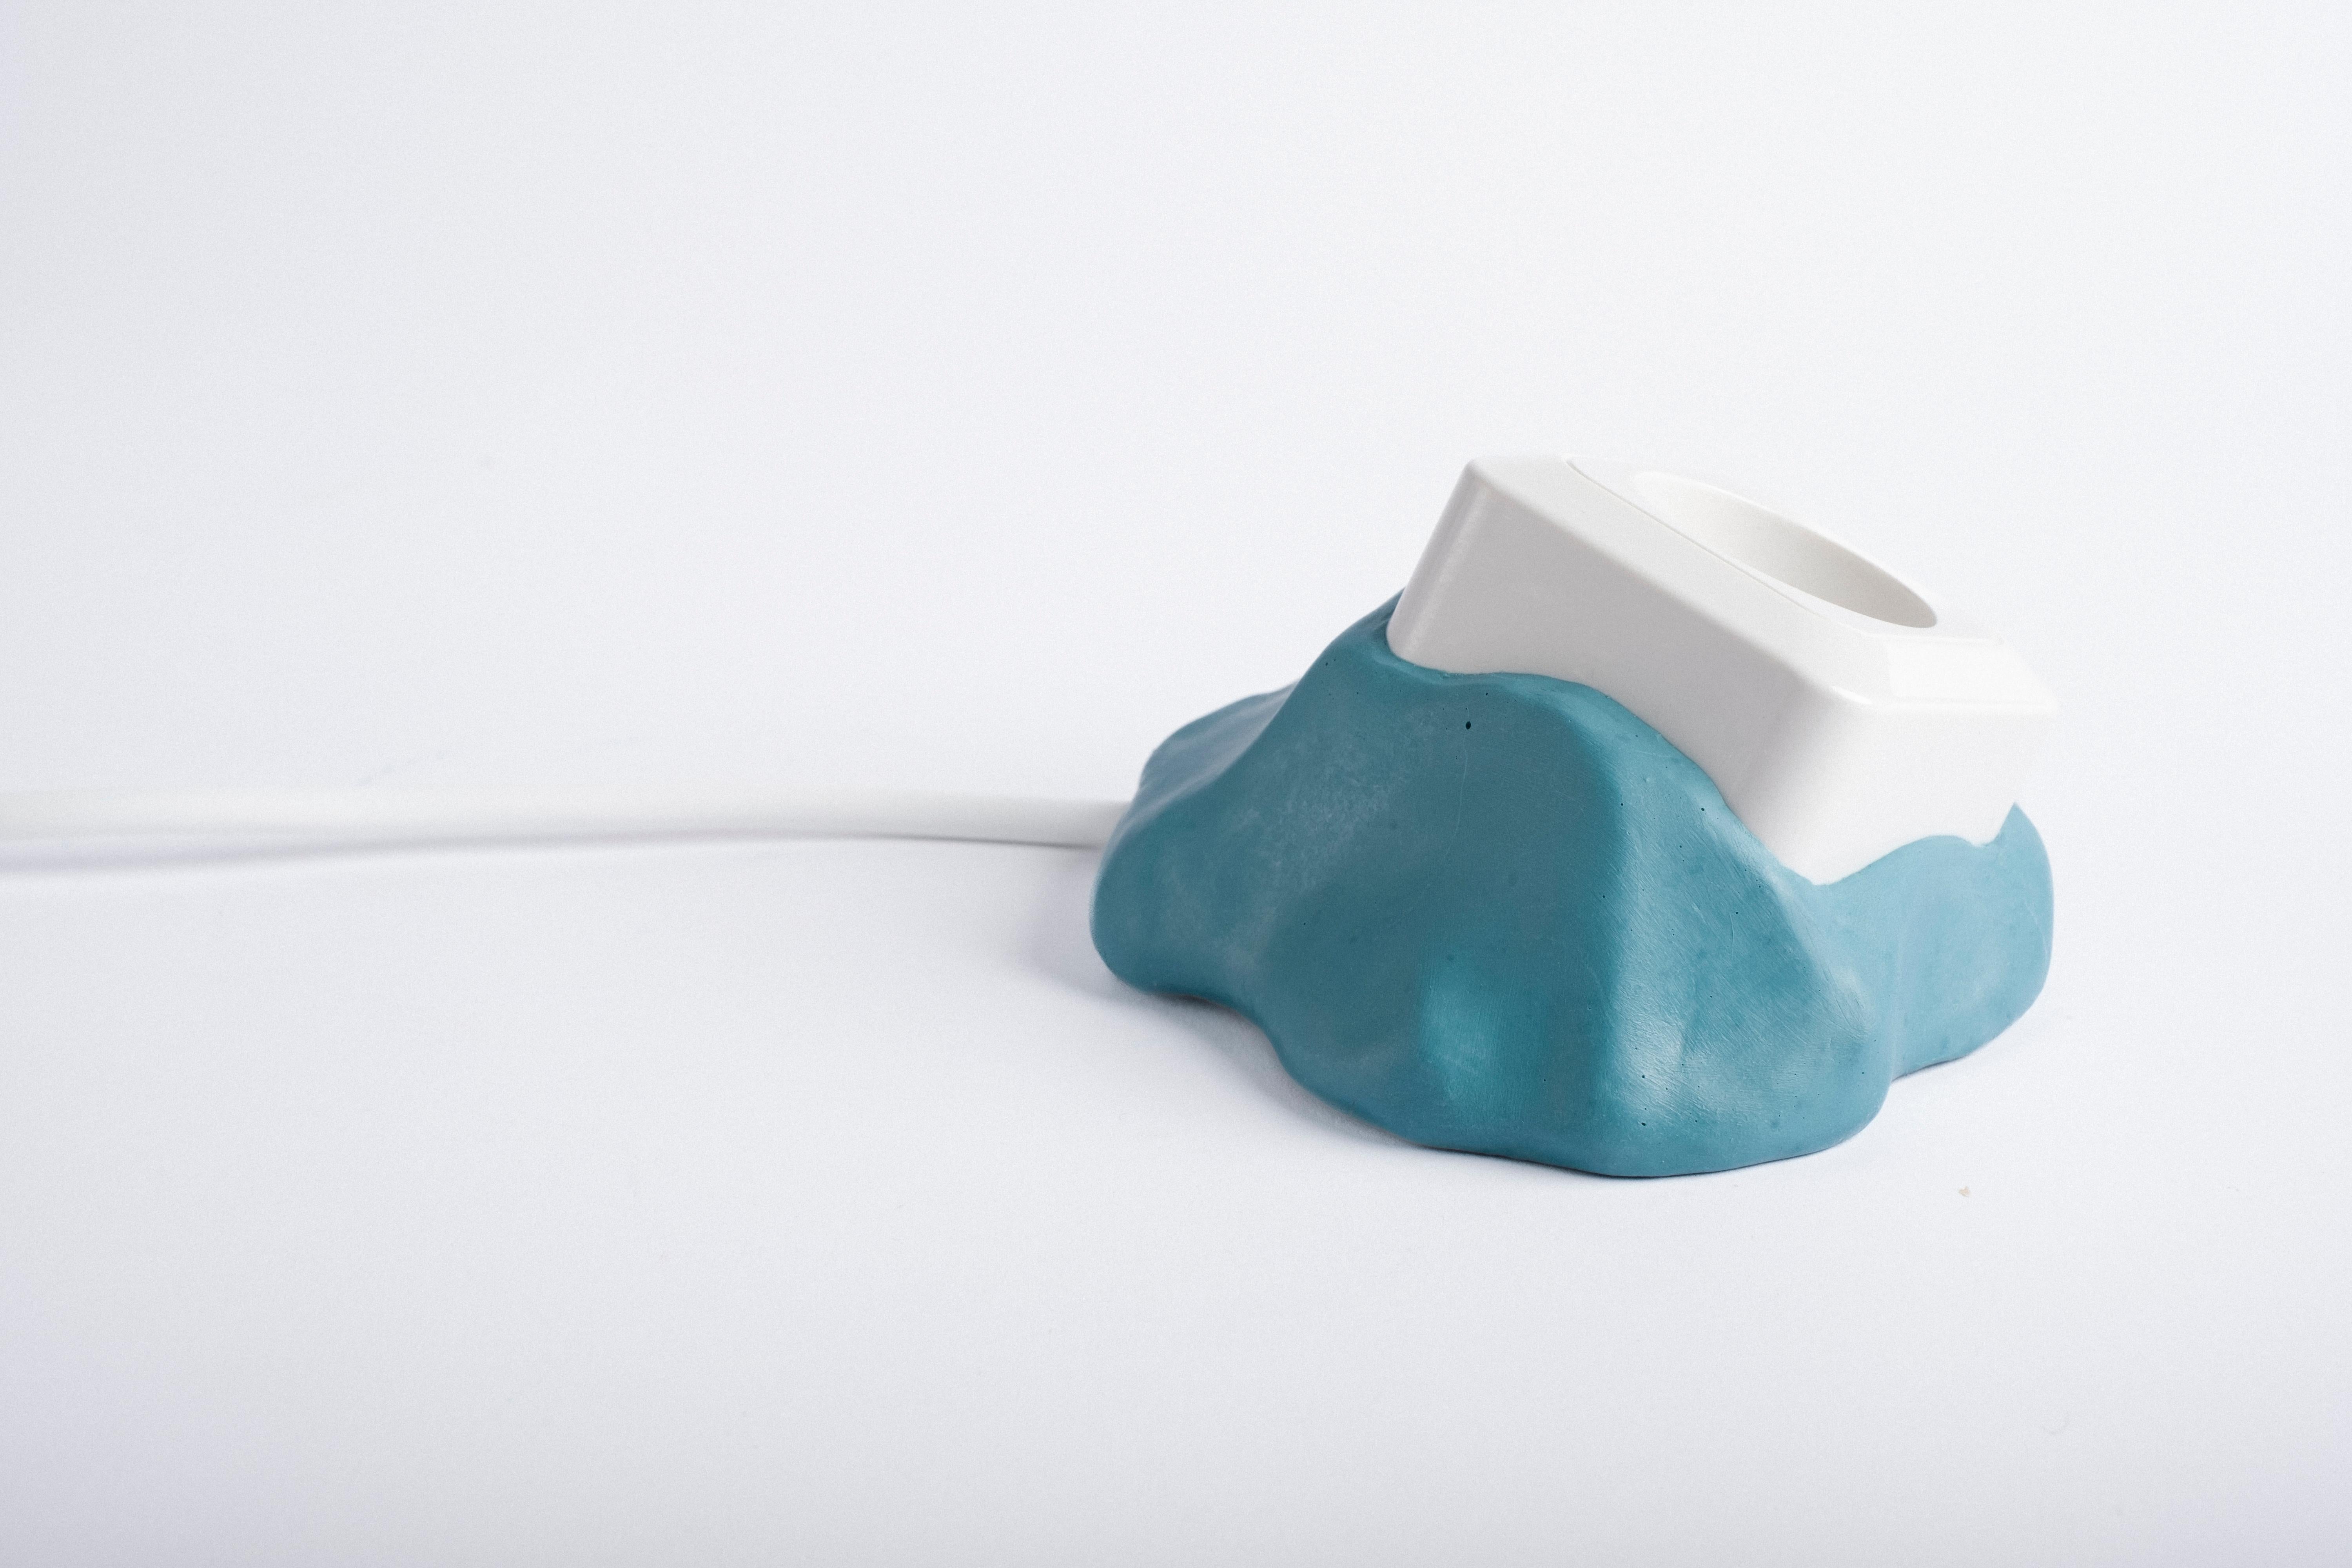 Single socket object 16.5. Mint SAKER by Studio Gert Wessels, in mint. Hand crafted in an organic shape and made in his studio in the Netherlands. 

In his daily practice he investigates the relationship between form and function. The result is a